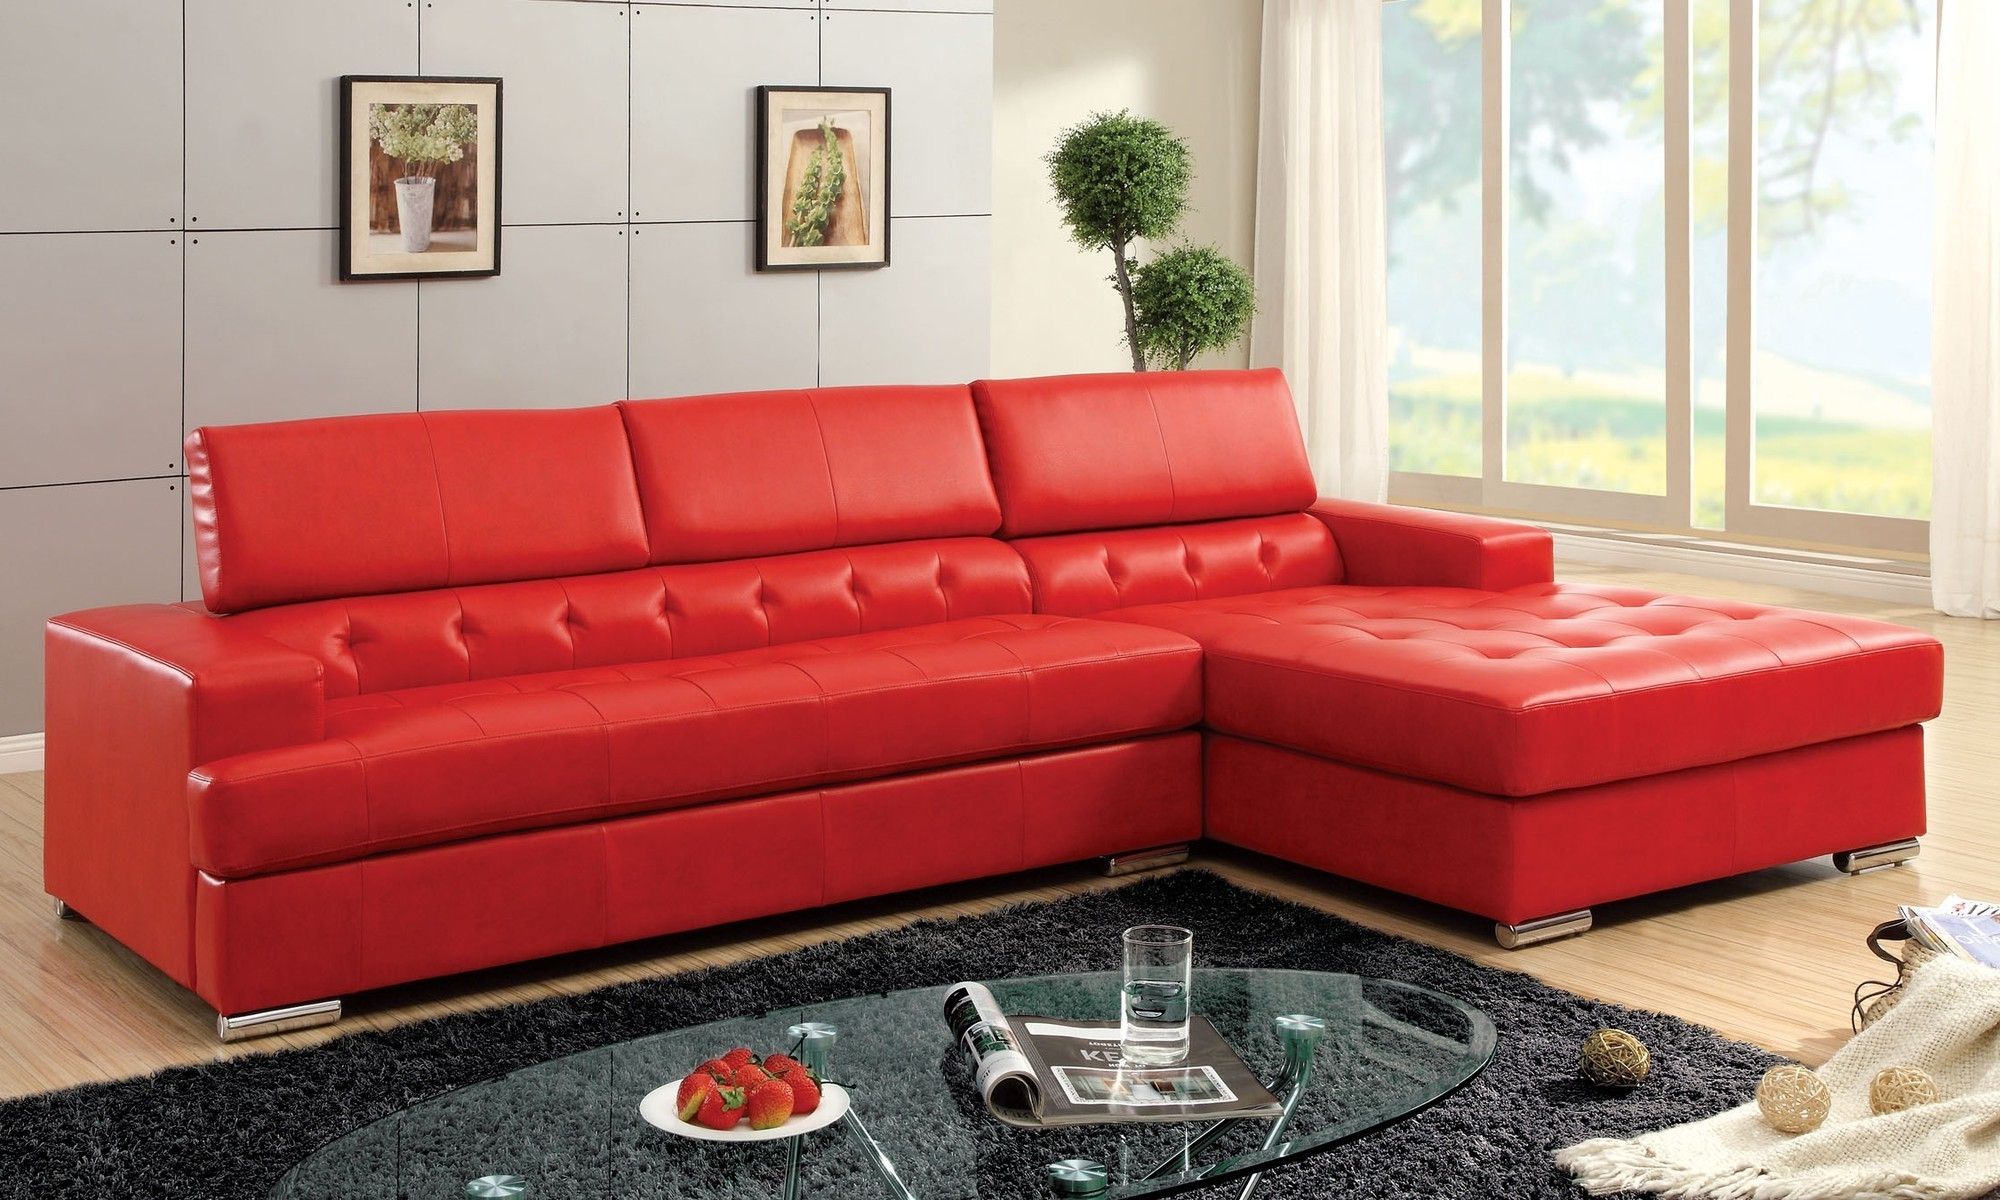 Red Leather Couches For Living Room Pertaining To Latest Red Maroon Leather Sofa With Tufted Height Back. Furniture (View 13 of 15)